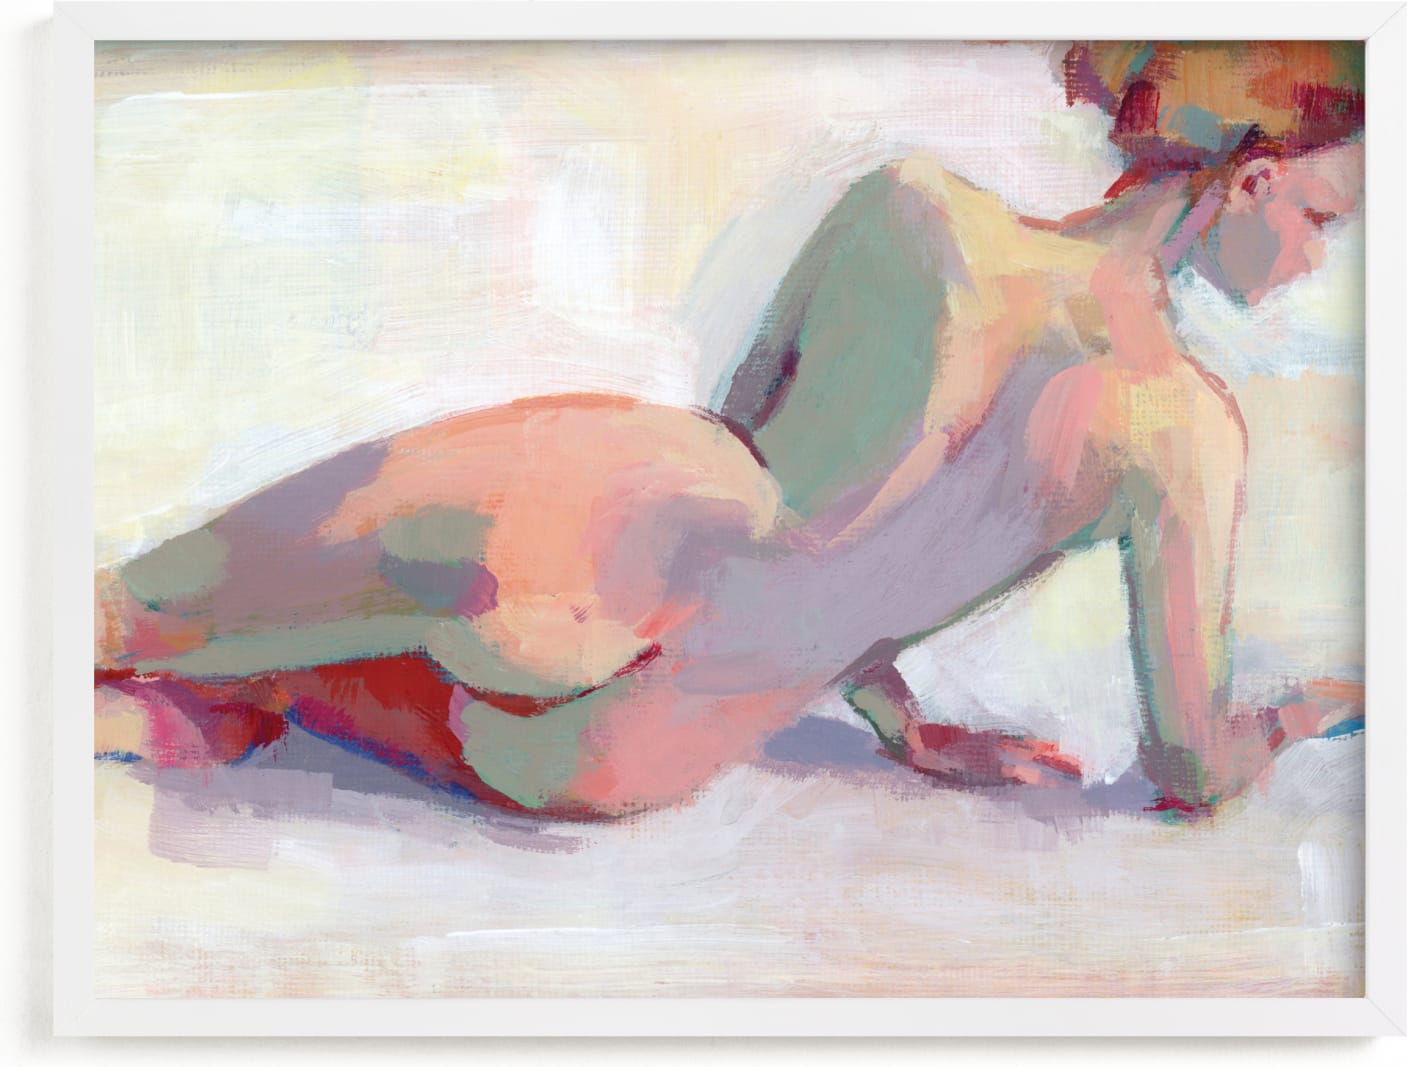 This is a colorful art by sue prue called Sunbather.